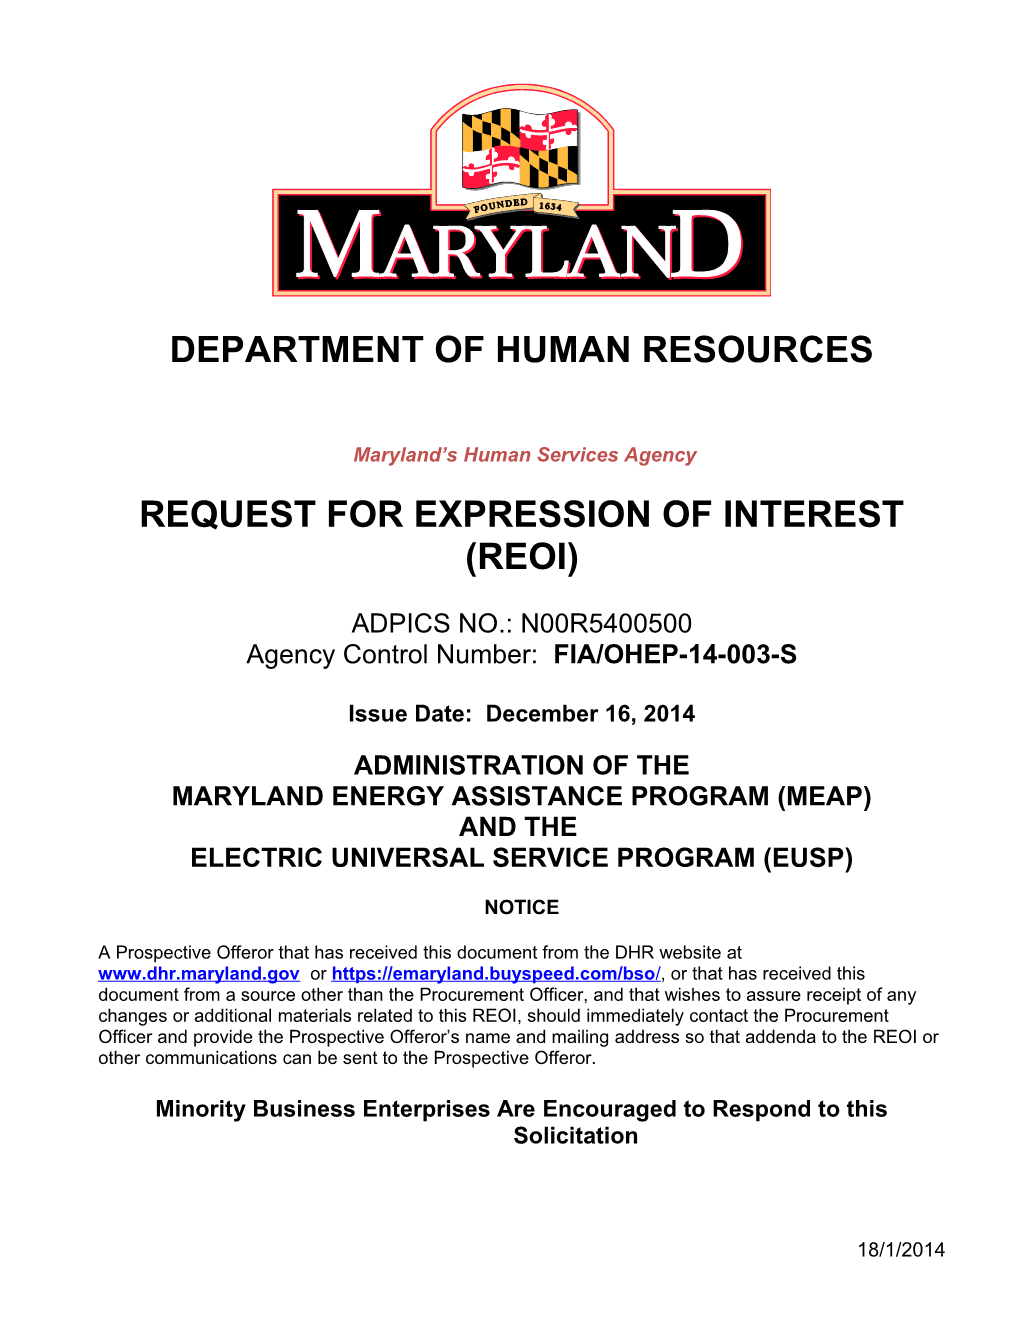 DBM Rrequest for Proposal Template